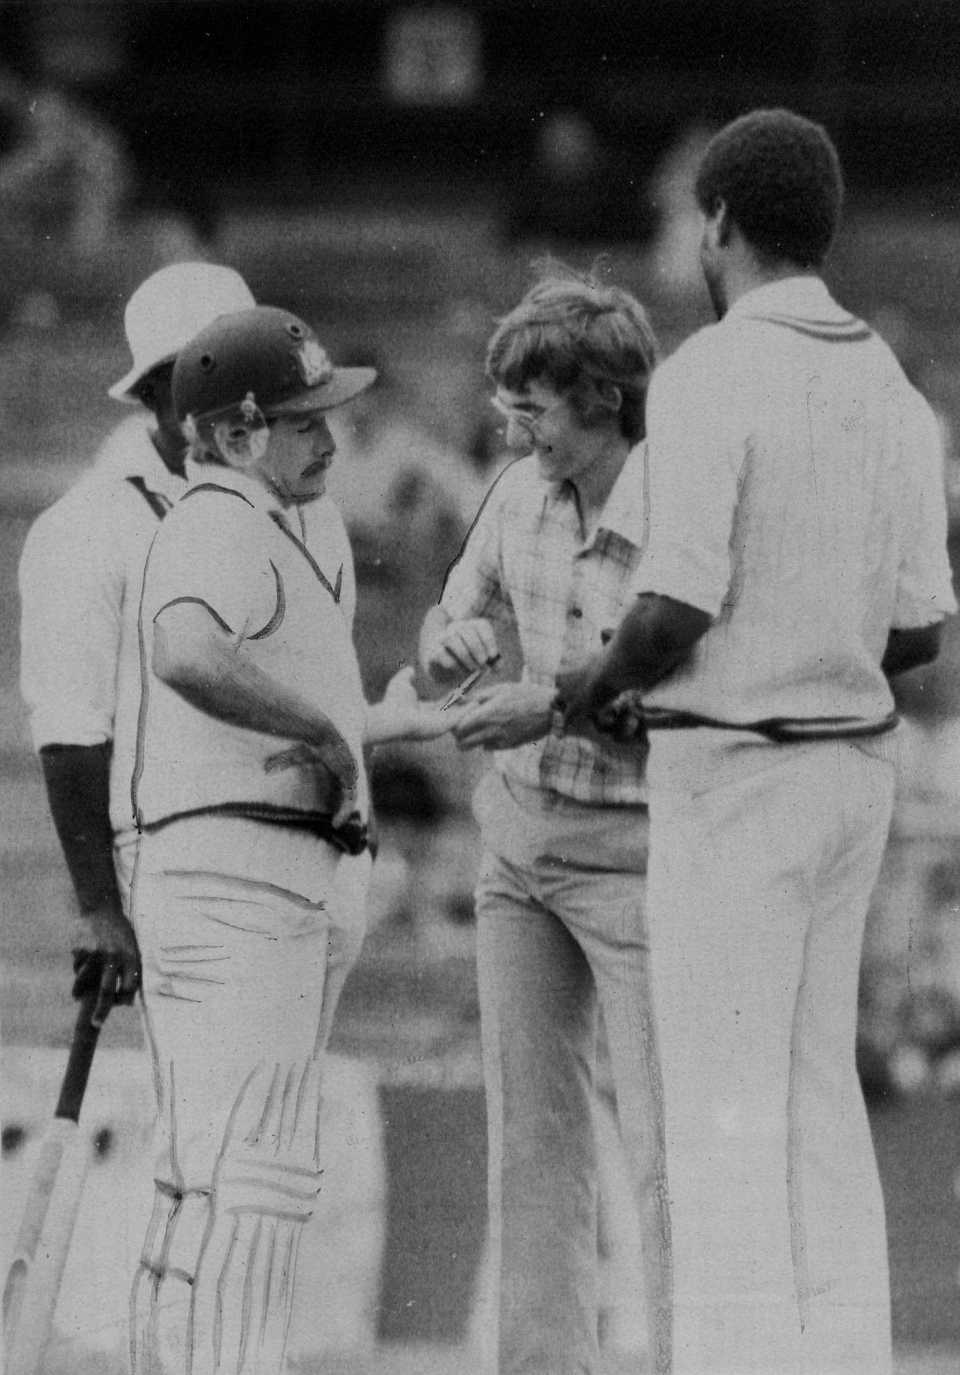 Bruce Laird grimaces while receiving a painkilling injection after being hit on the hand by Michael Holding